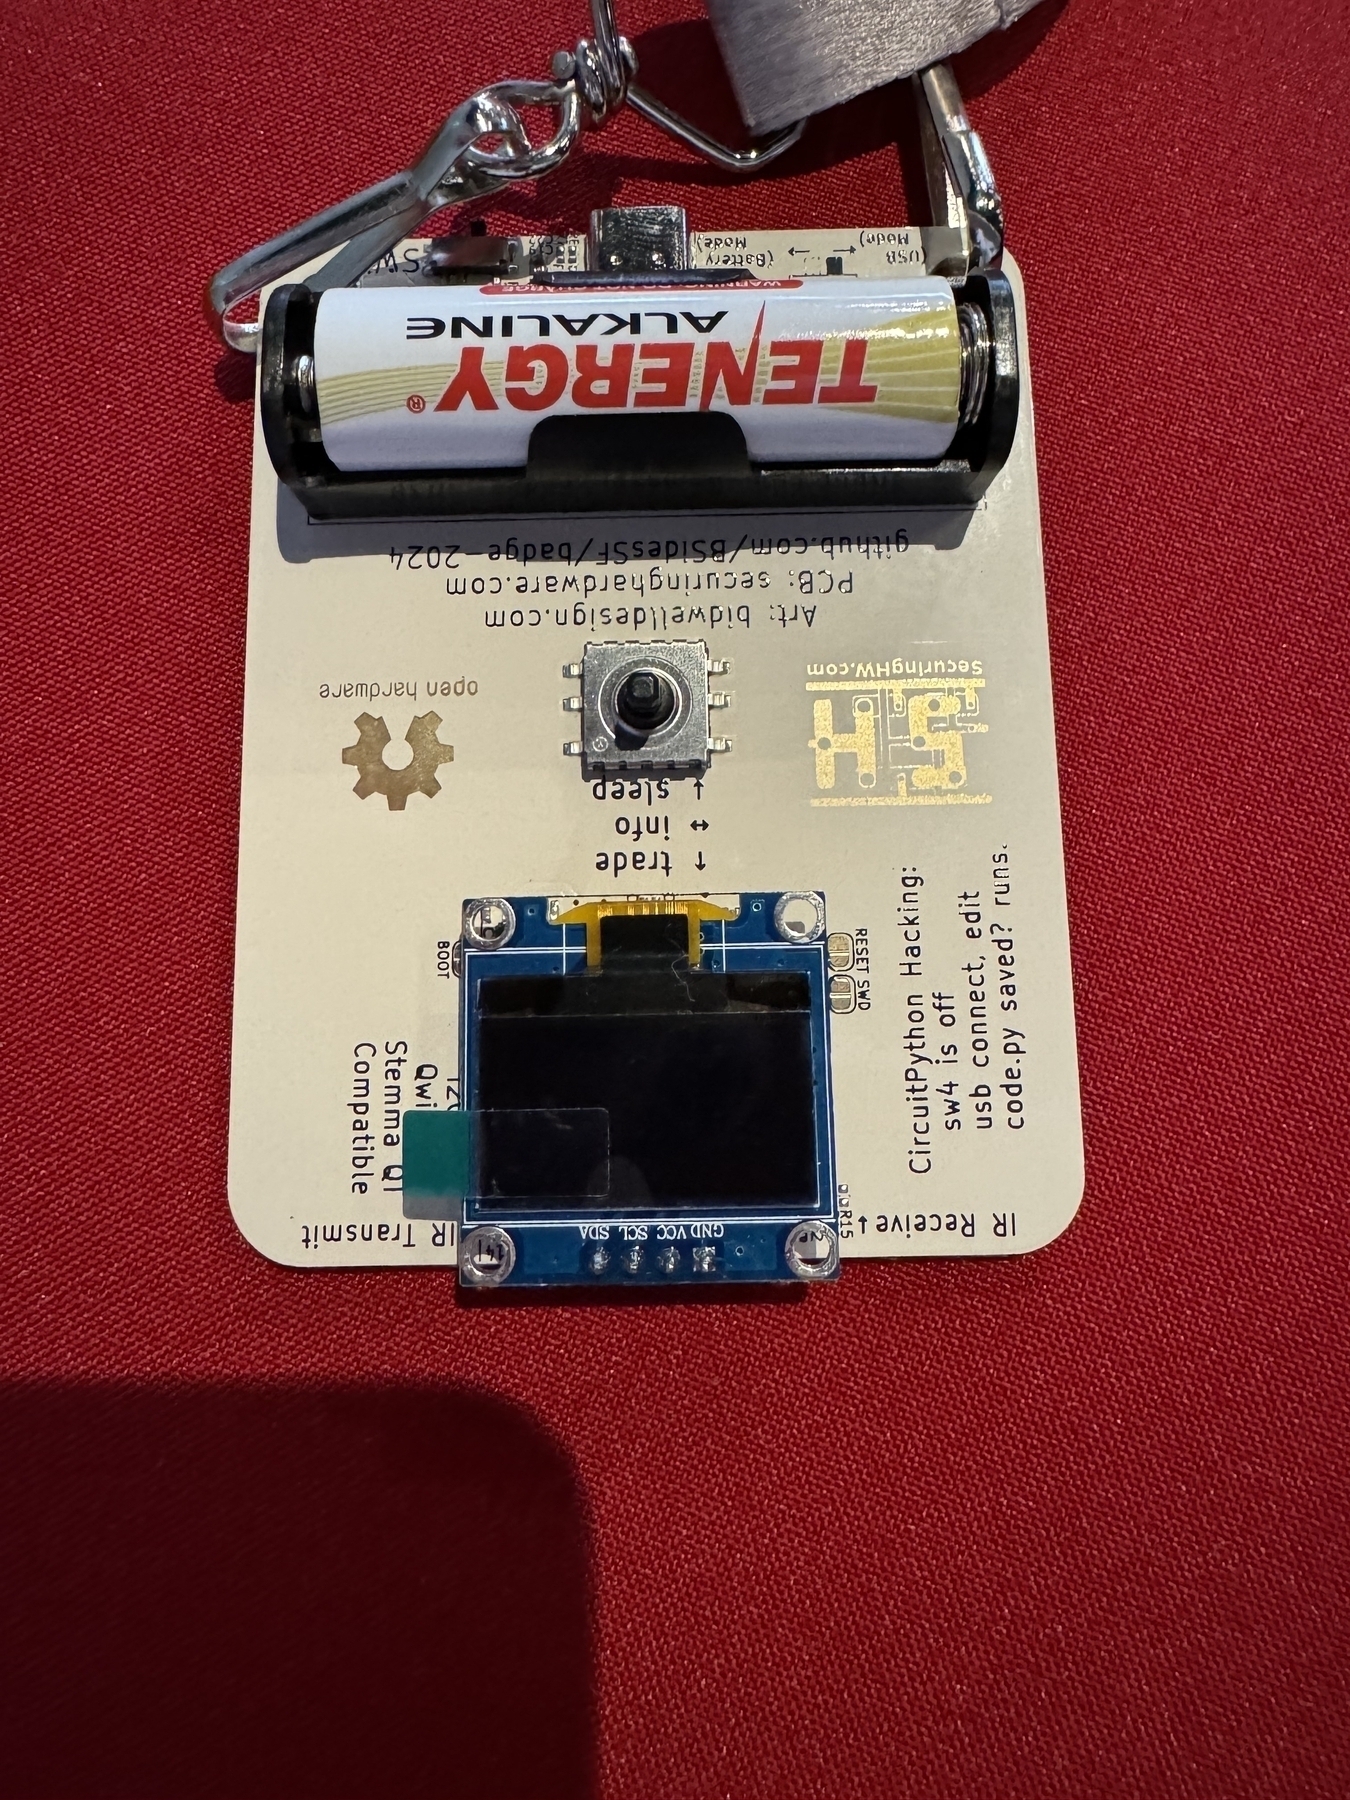 The back of the badge showing the electronics, a tiny display, and how to program it with Python.